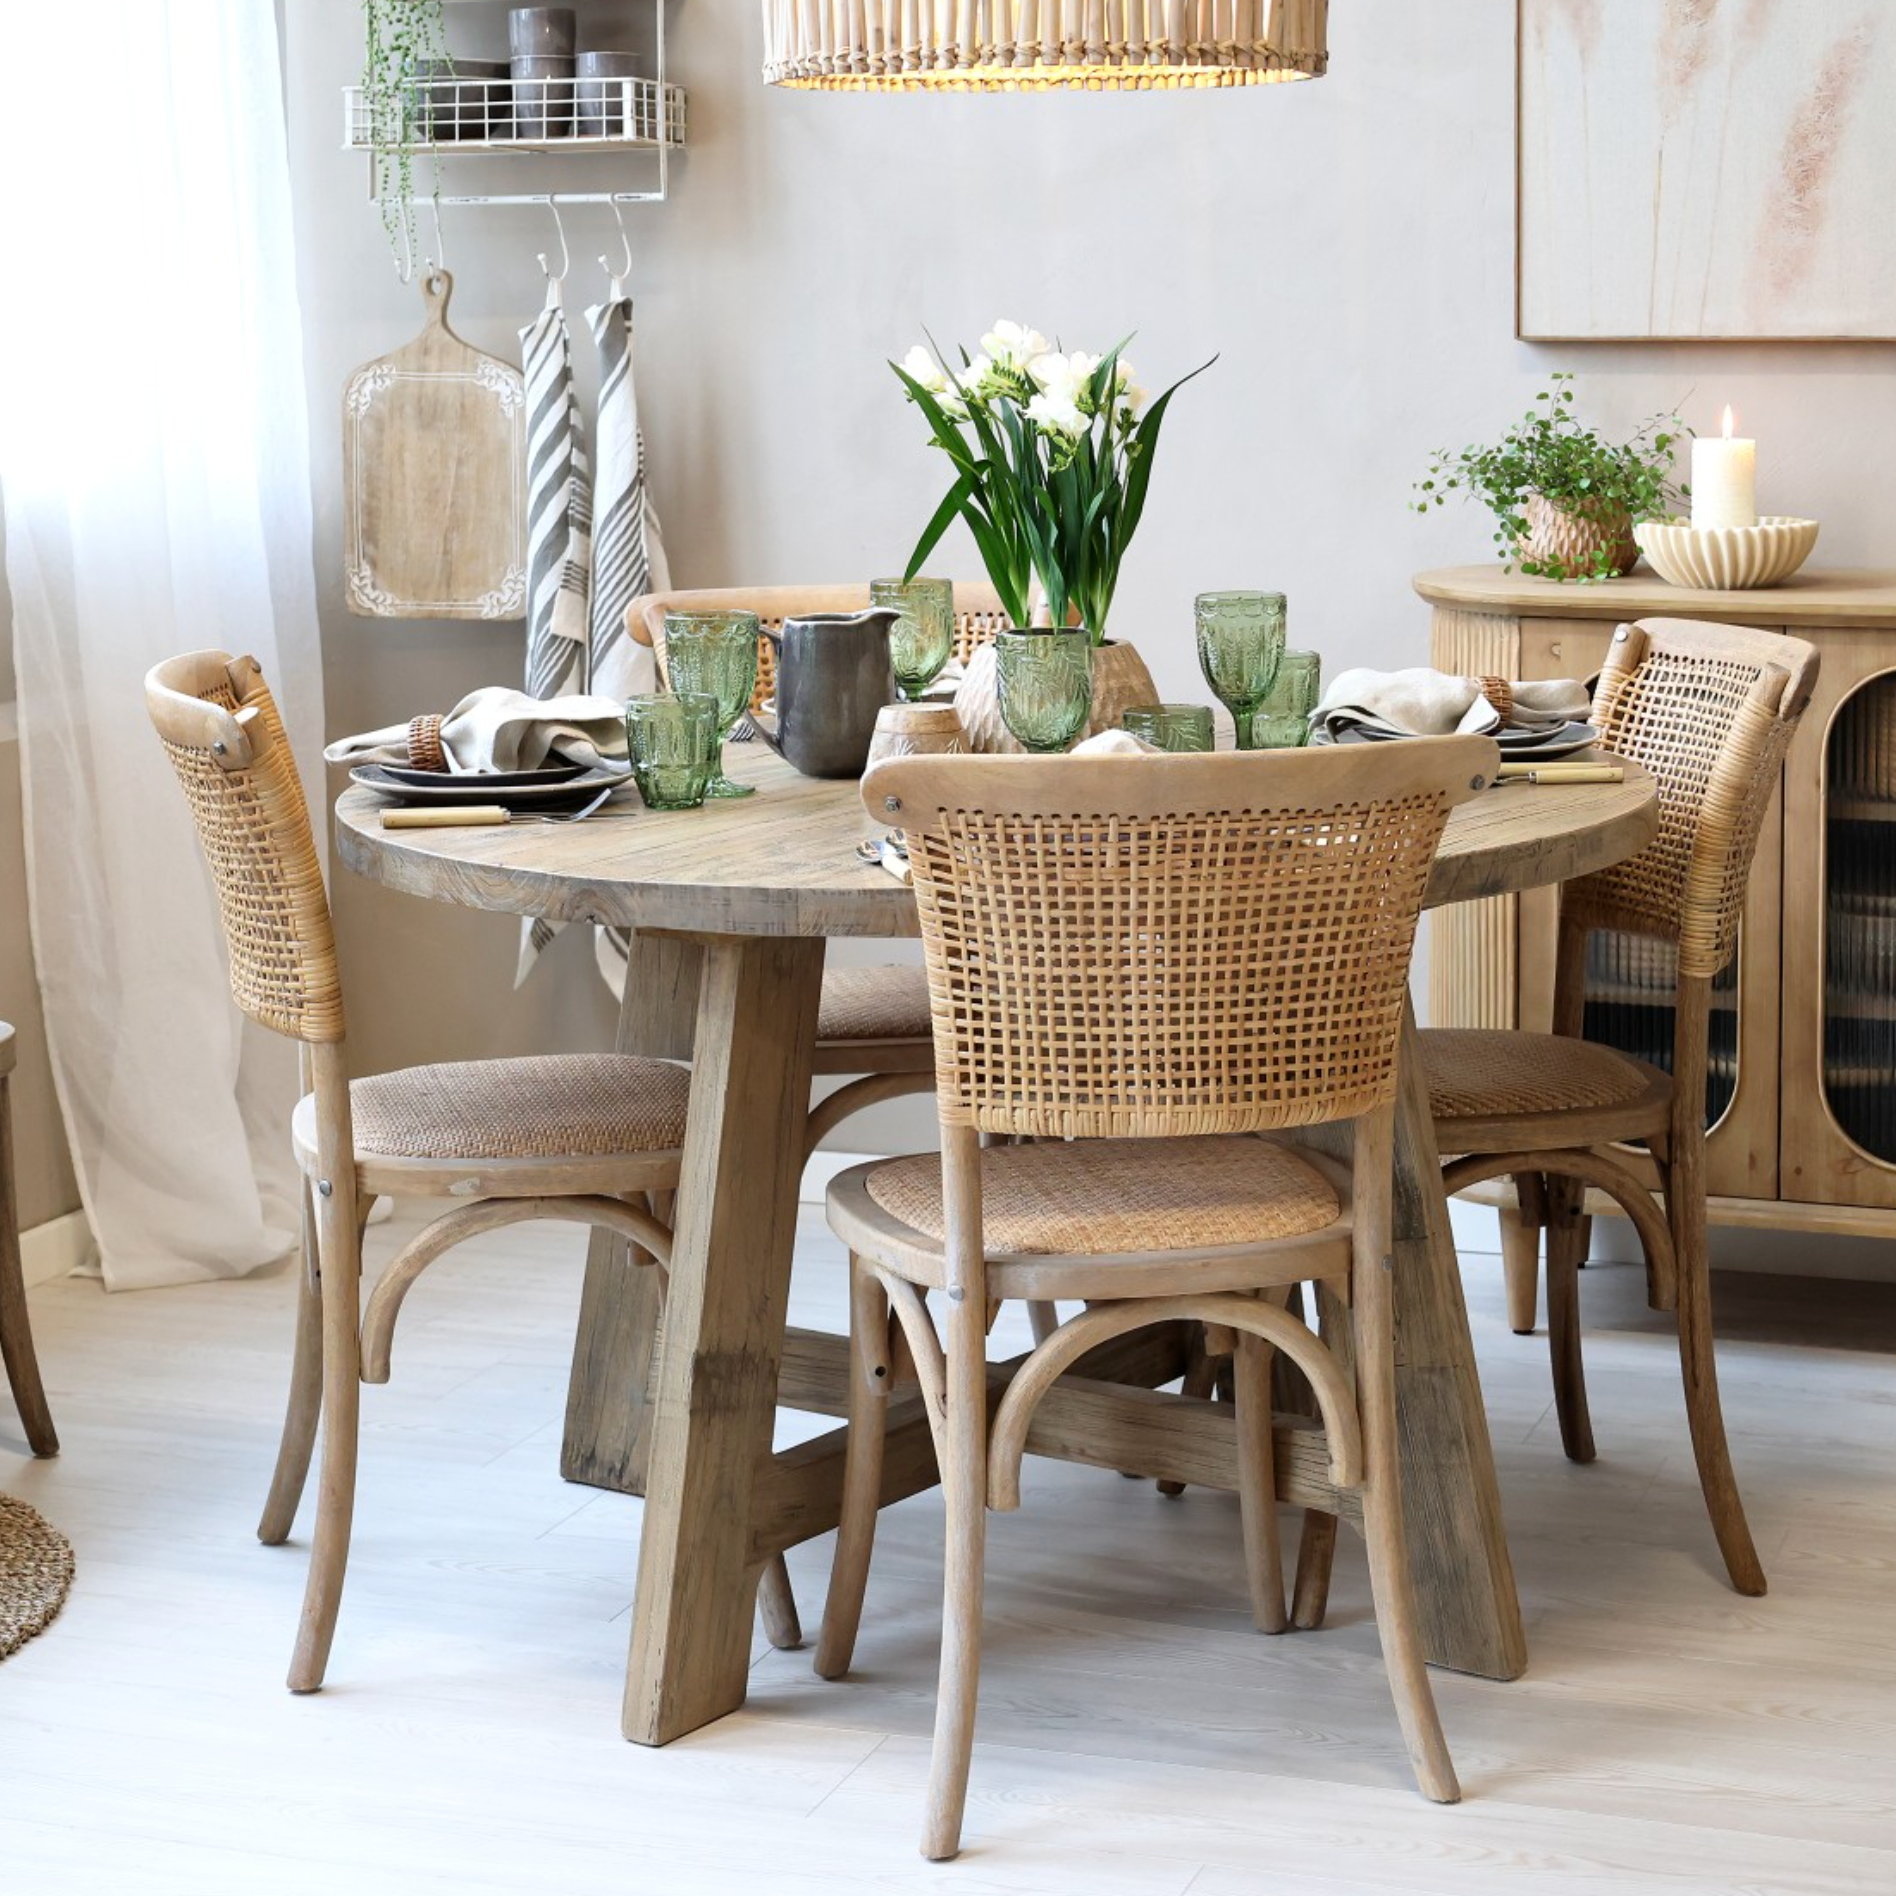 Round wood dining table with wicker backed chairs and crockery.